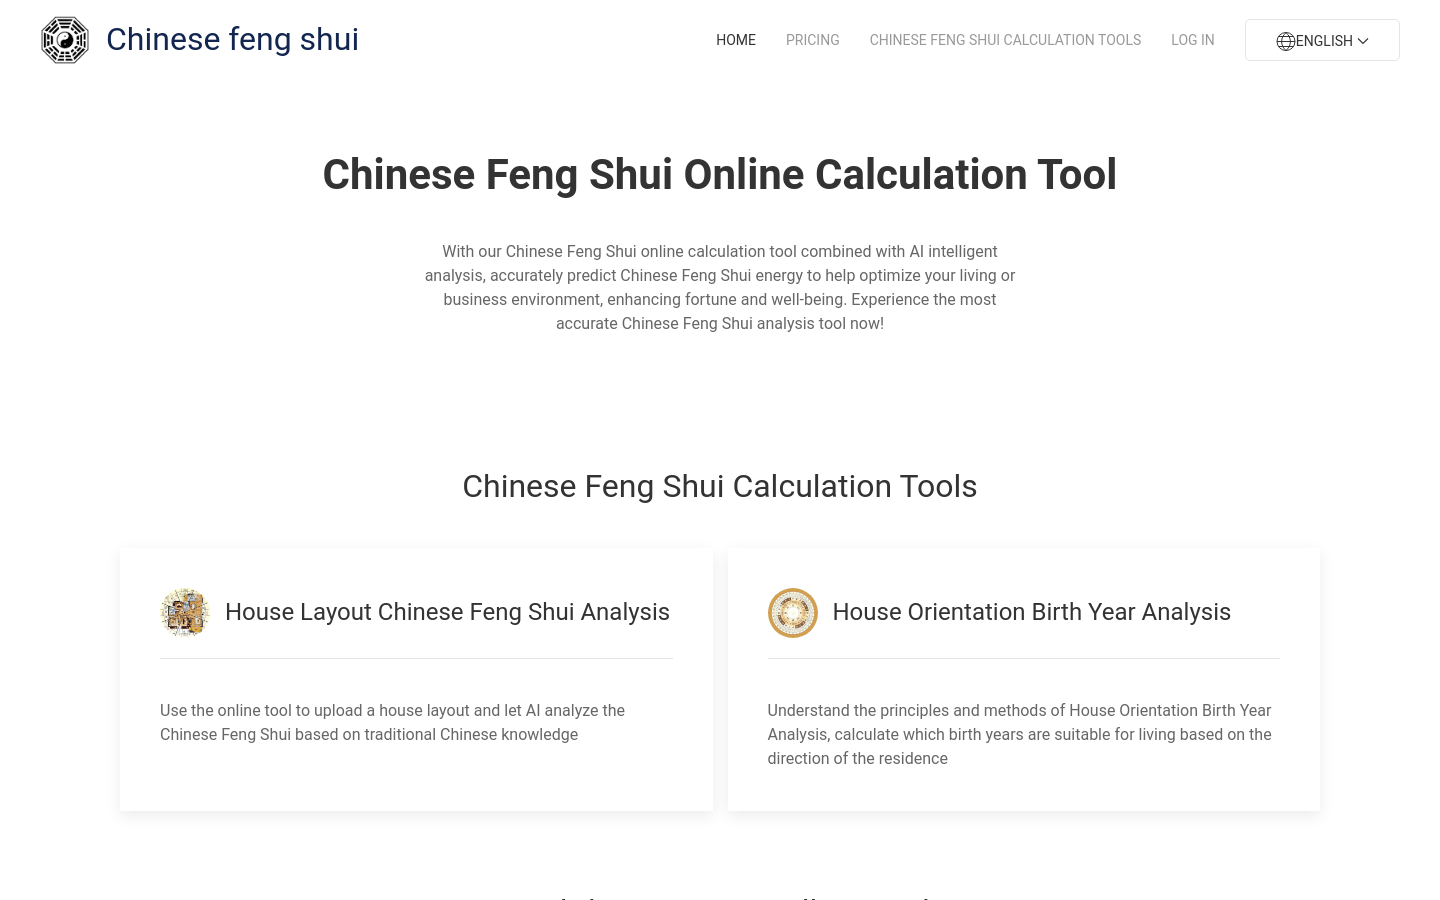 Chinese Feng Shui Online Calculator